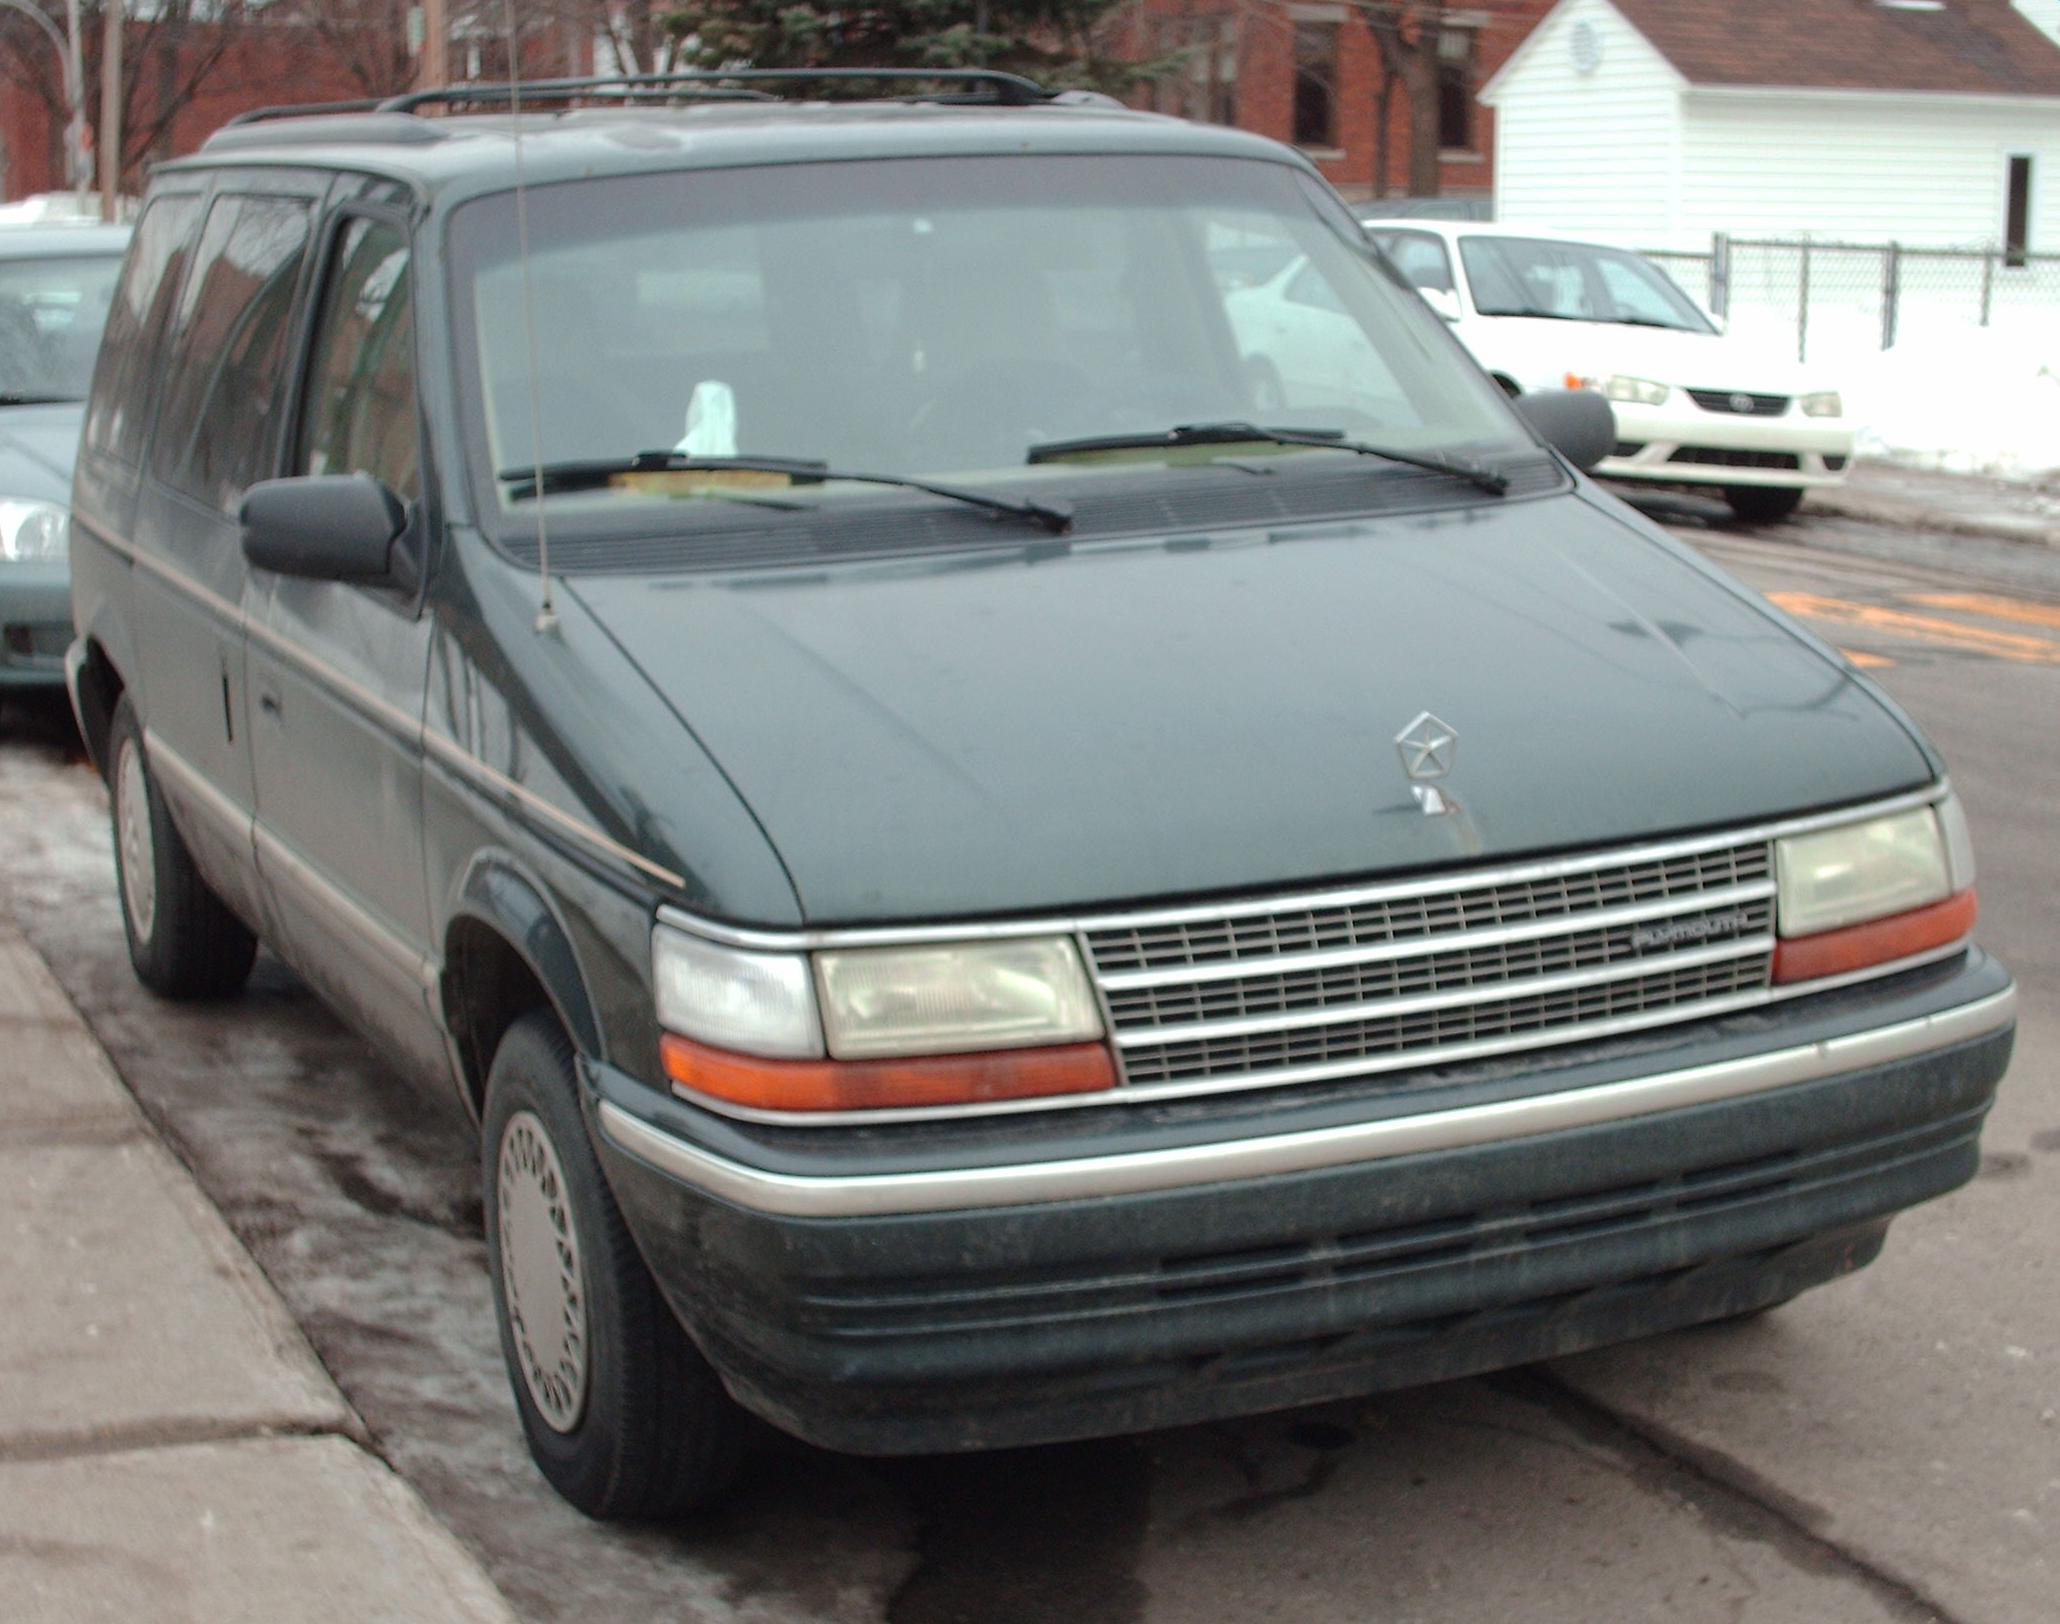 Plymouth Voyager 1992 #7